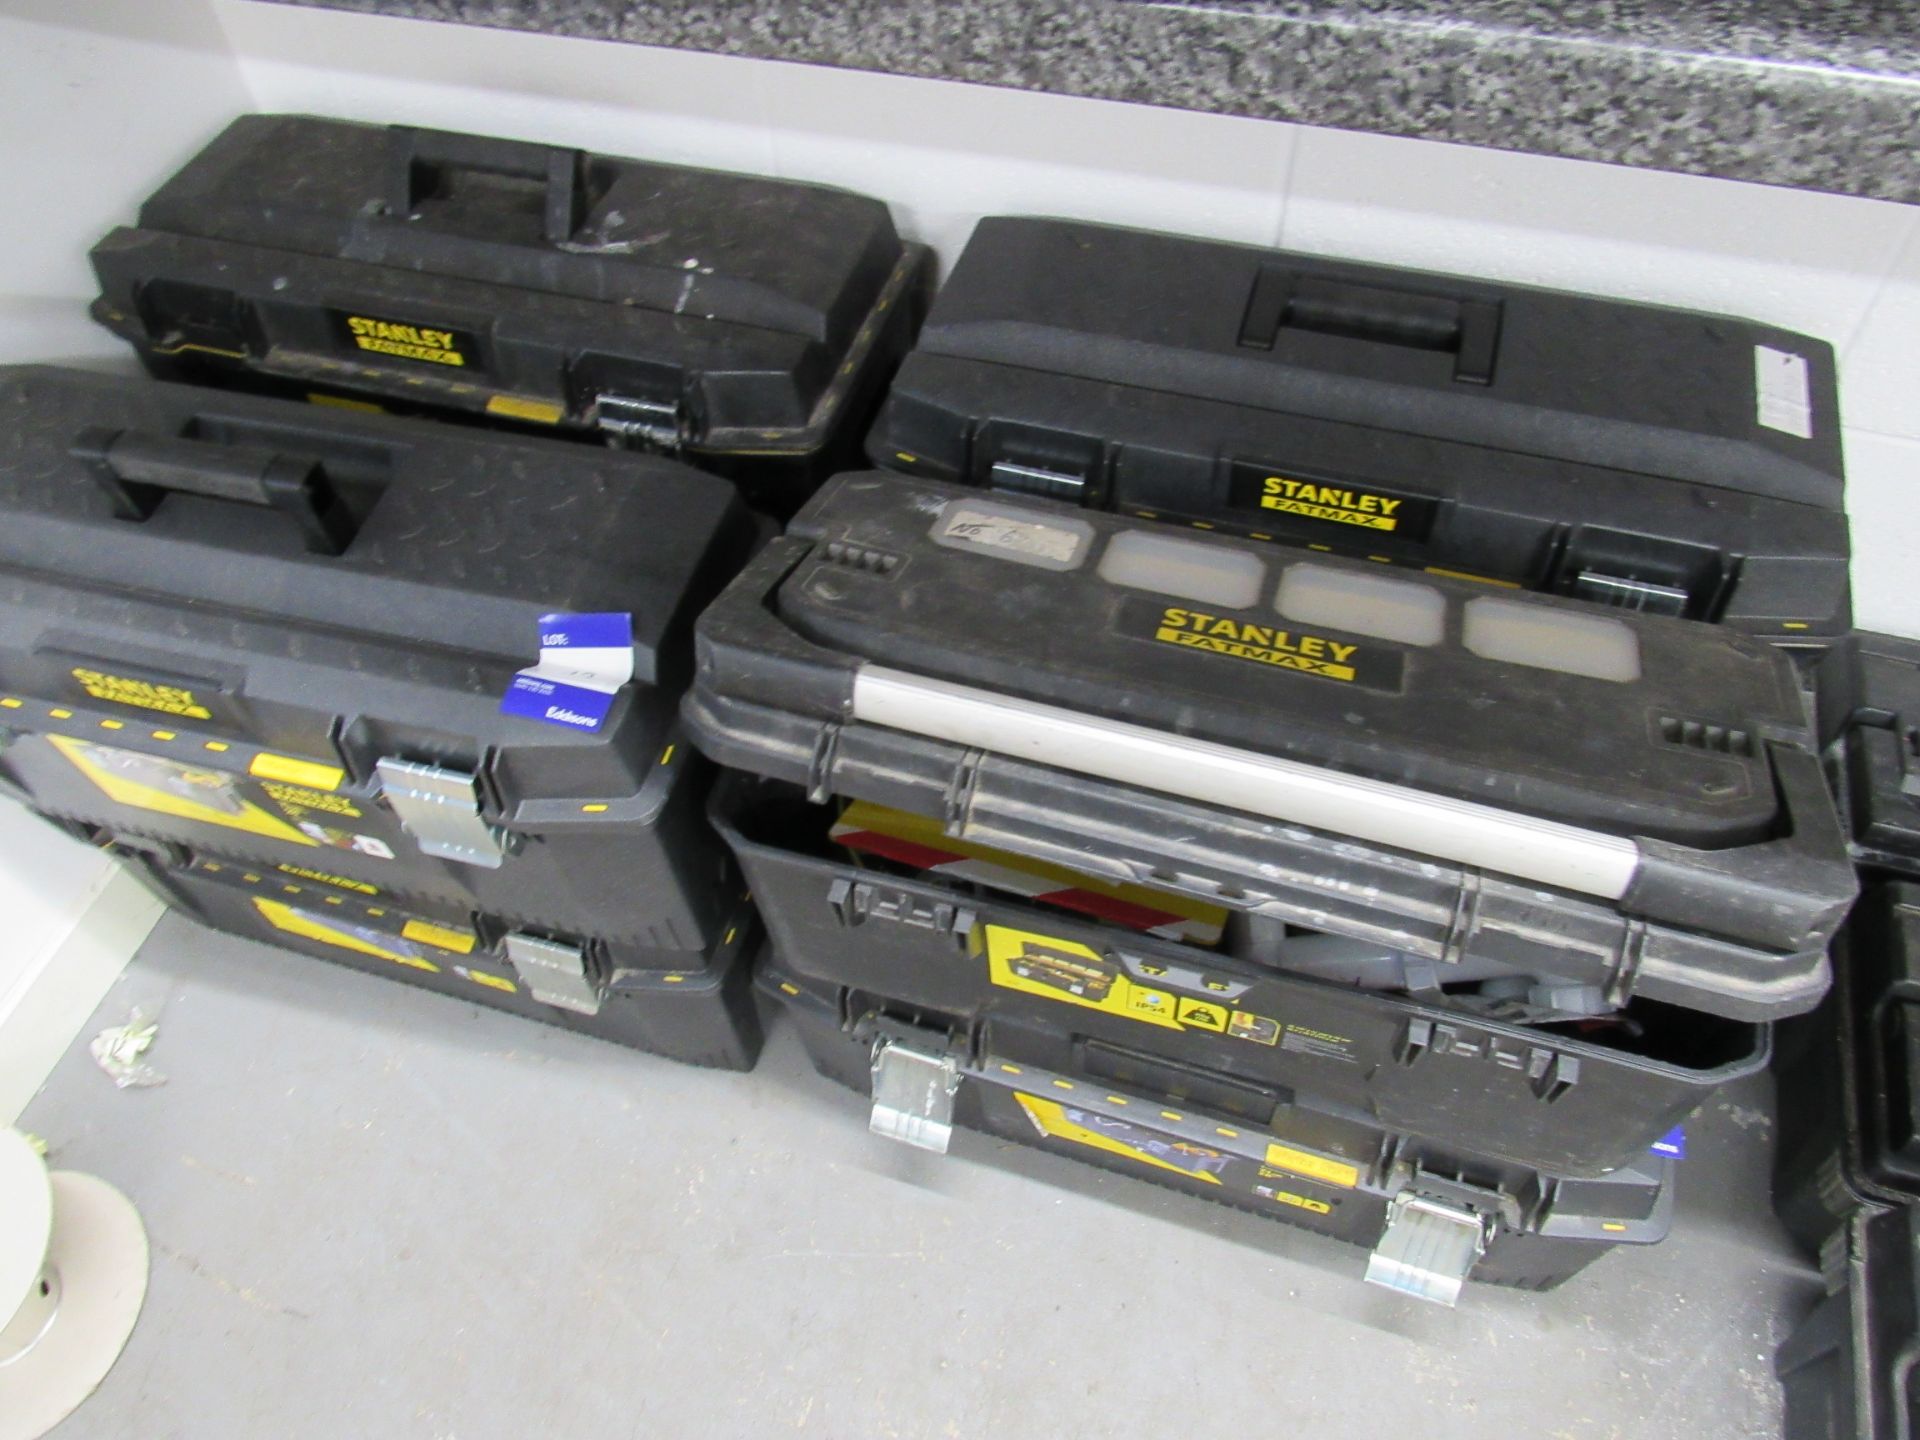 8 Stanley Fat Max Toolboxes with various contents